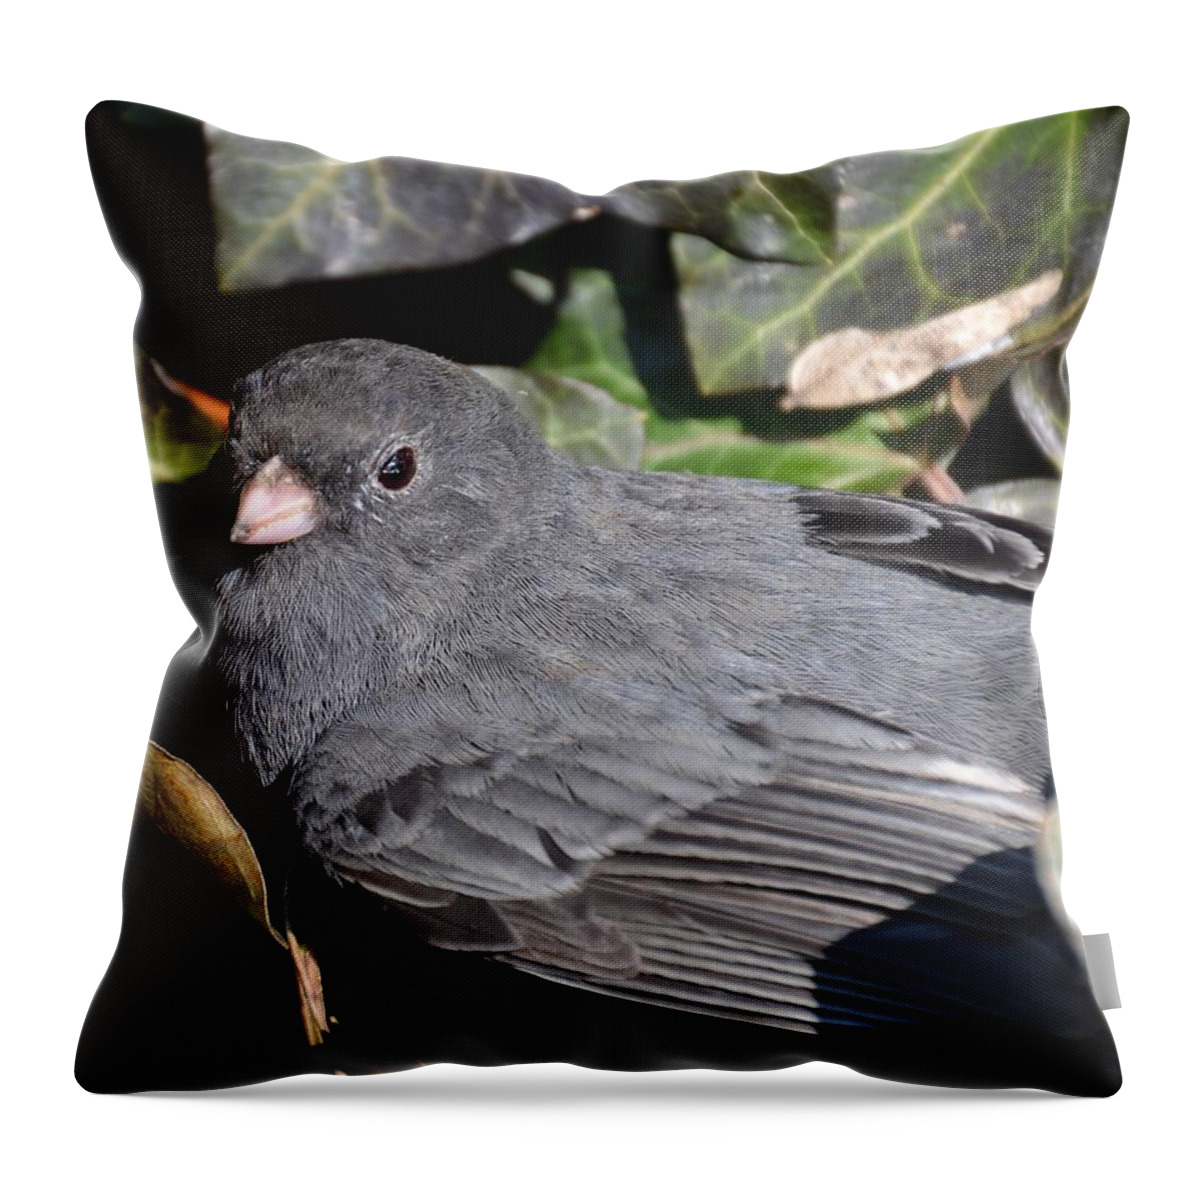 Junco Throw Pillow featuring the photograph Junco by Randy J Heath